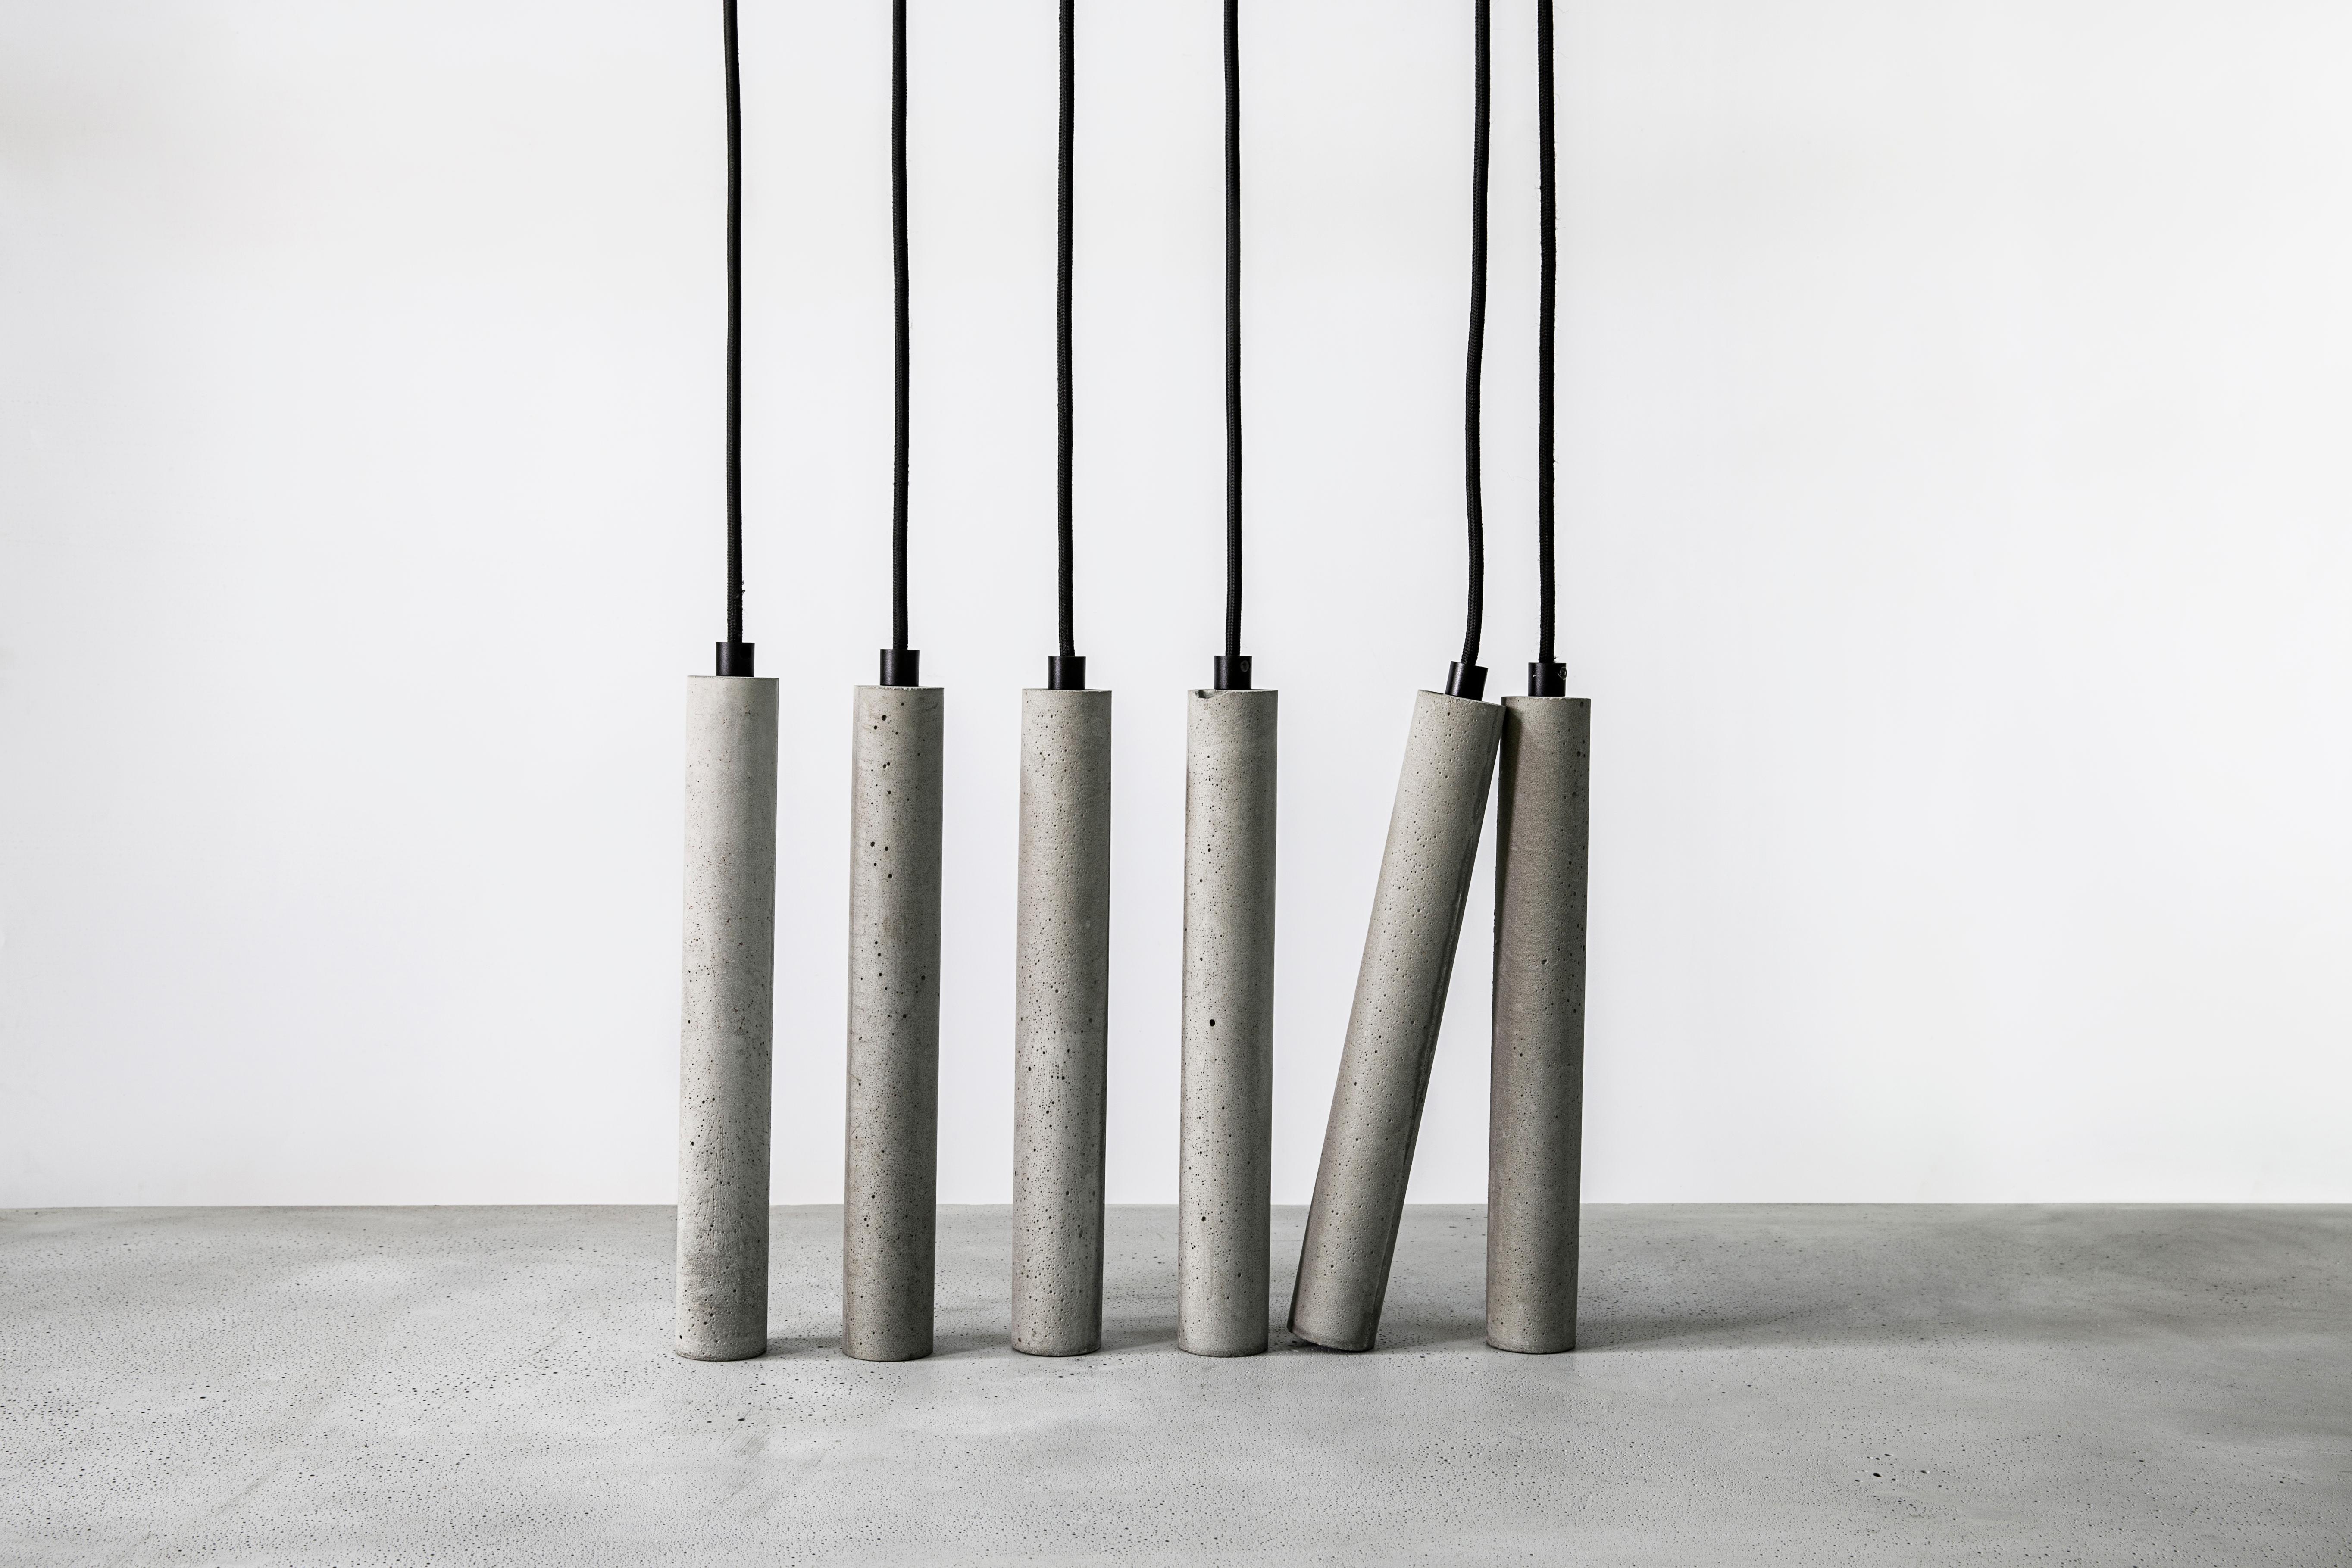 Chinese Concrete and Aluminum Pendant Lamp, “Bang, ”  from Concrete Collection